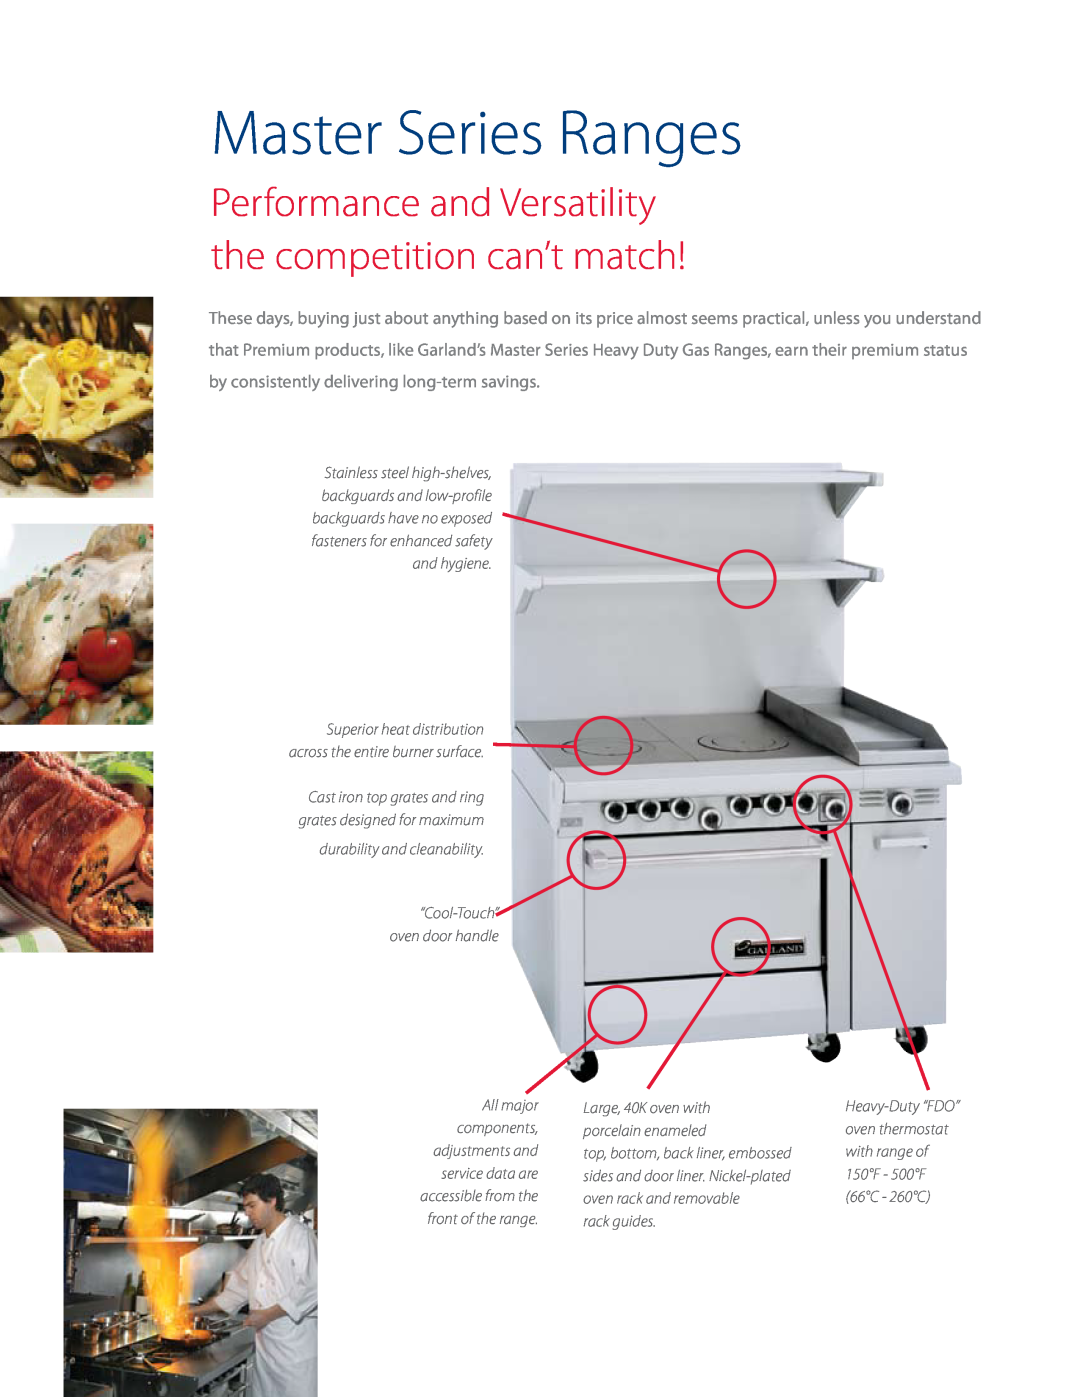 Garland manual Master Series Ranges, durability and cleanability, rack guides, “Cool-Touch”oven door handle 